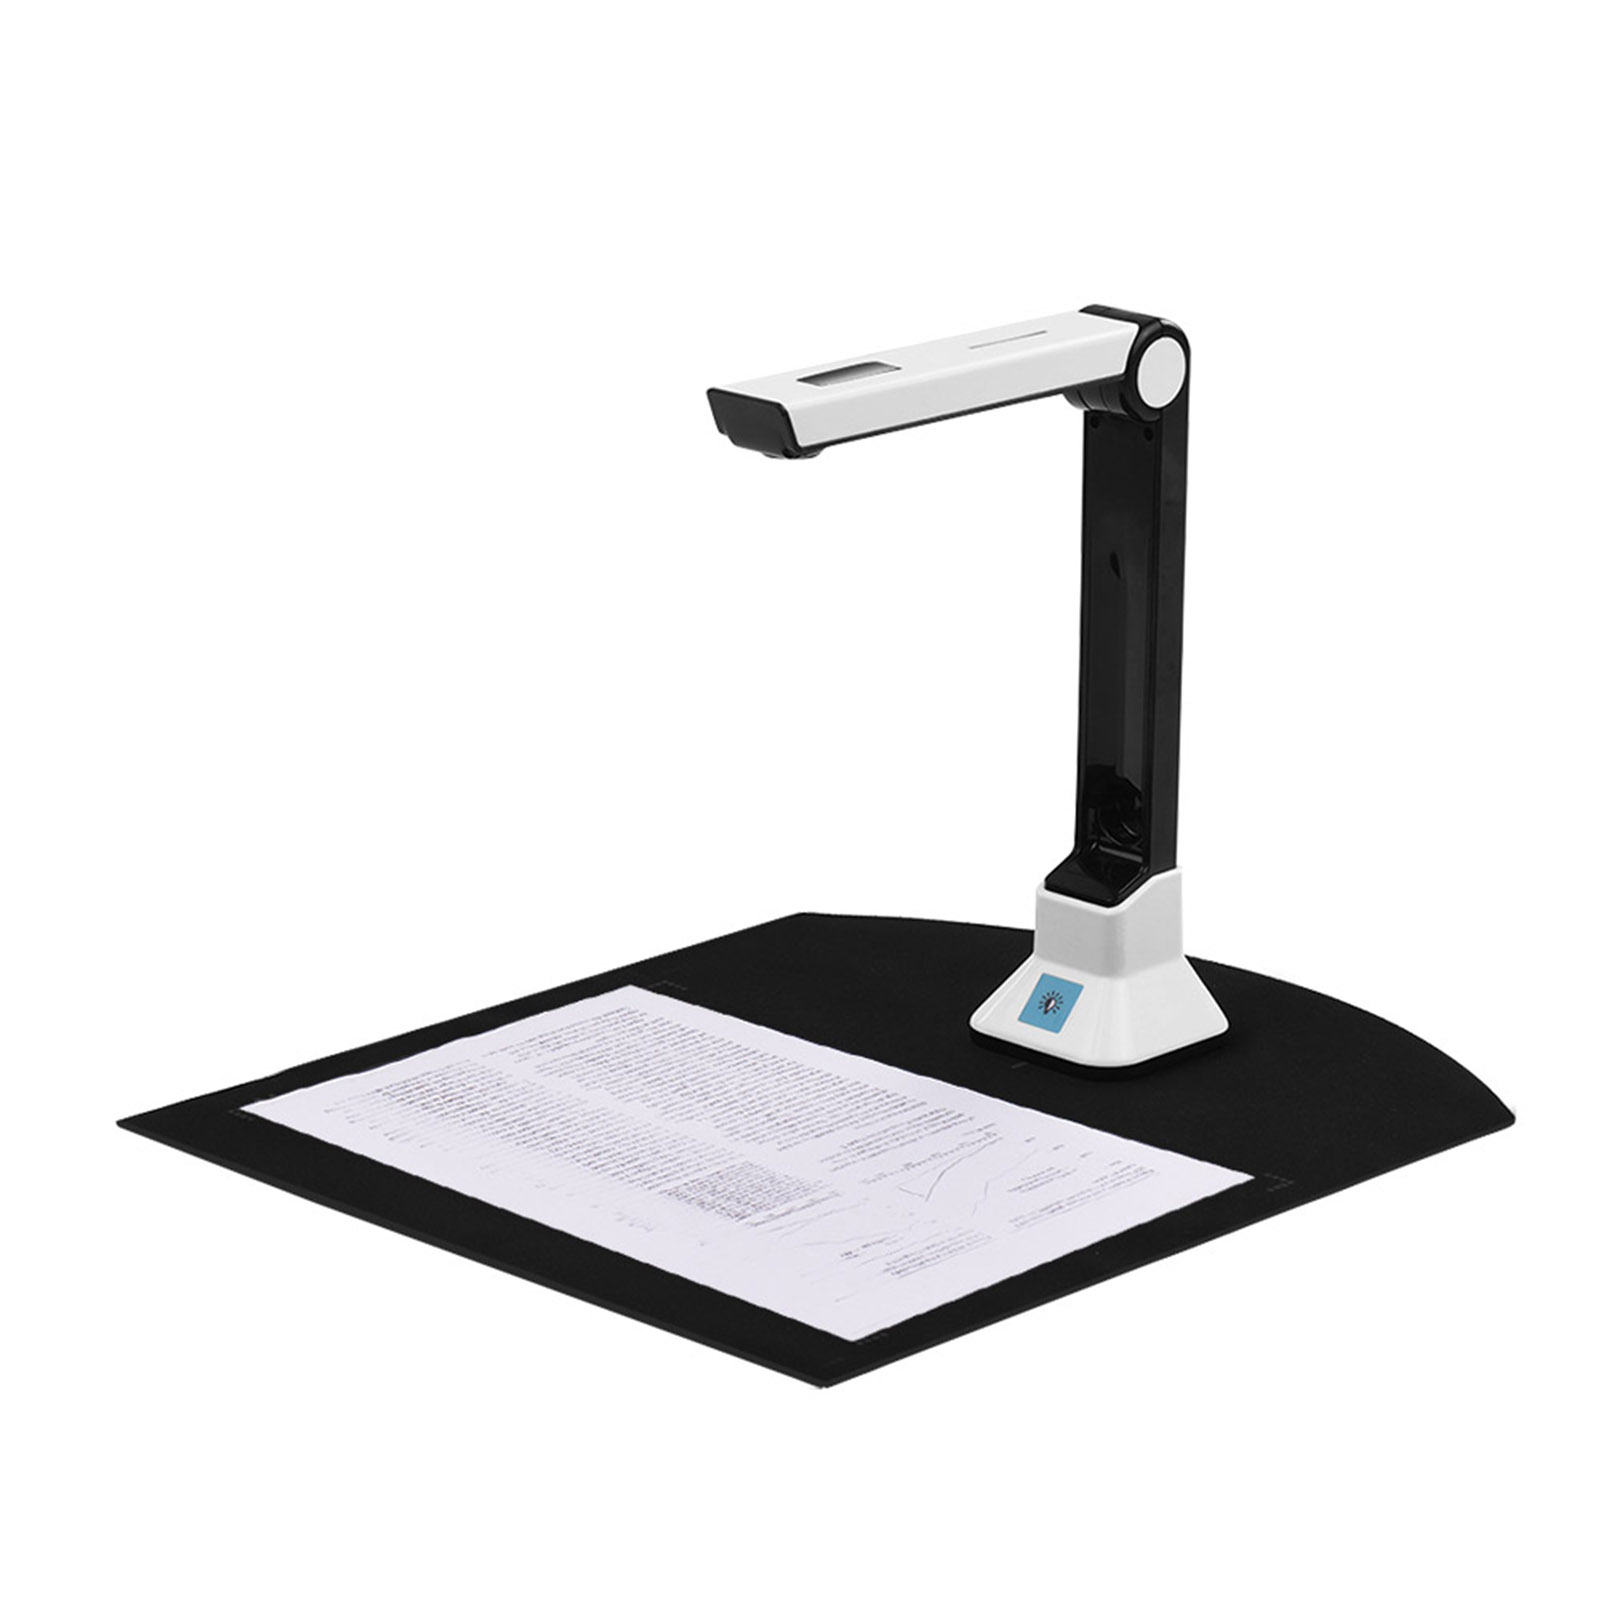 OWSOO BK50 Portable 10 -pixel High Definition Scanner Capture Size A4 Document for Passport File Documents Recognition Support 7 Languages German/ Russian/ French/ Japanese/ Spanish/ Italian/ En - image 1 of 7